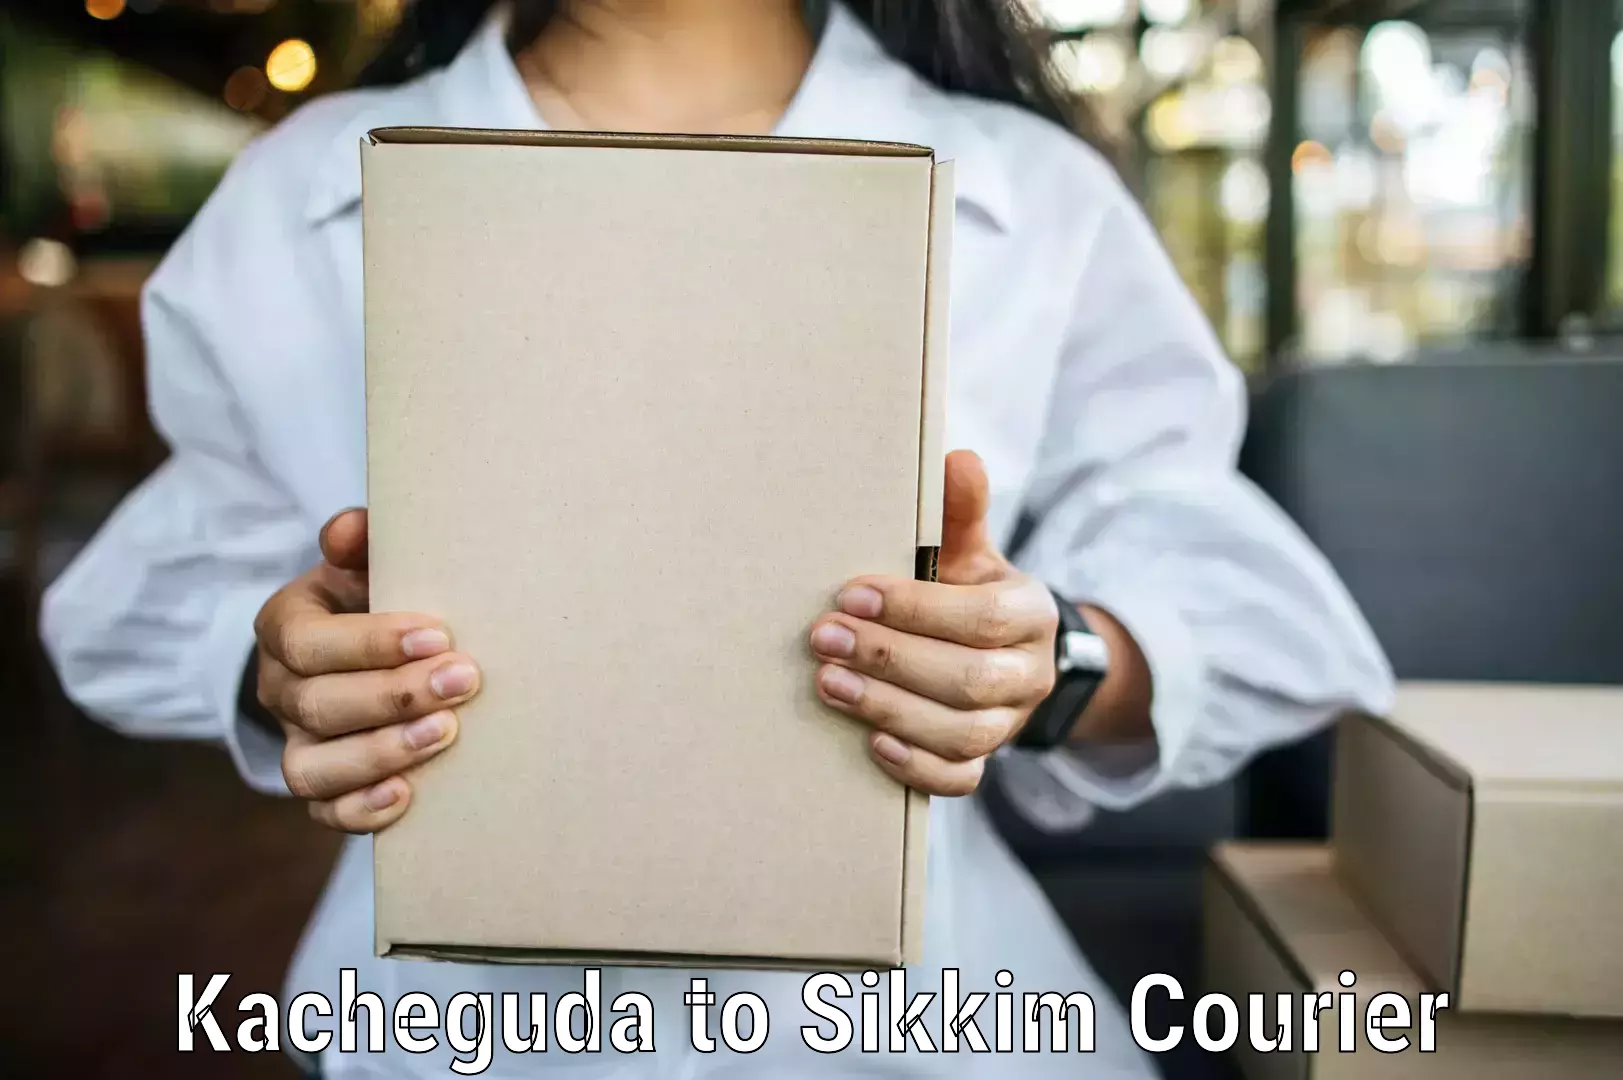 Multi-service courier options Kacheguda to Sikkim